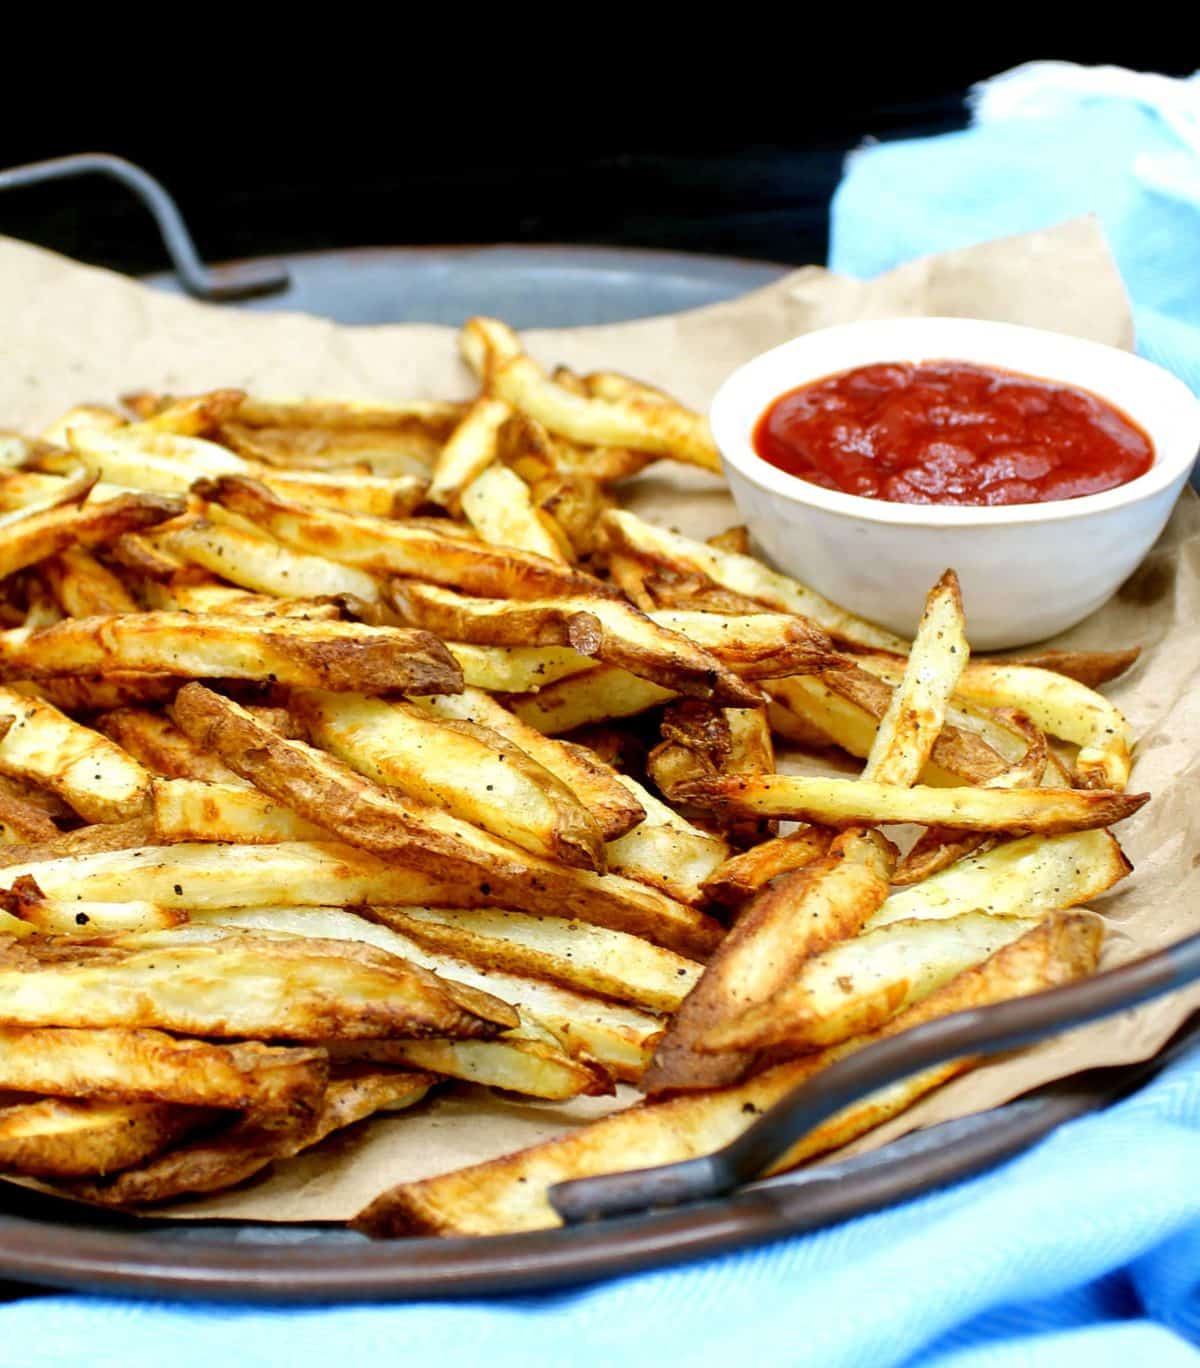 The best air fried French fries on brown paper served with ketchup.